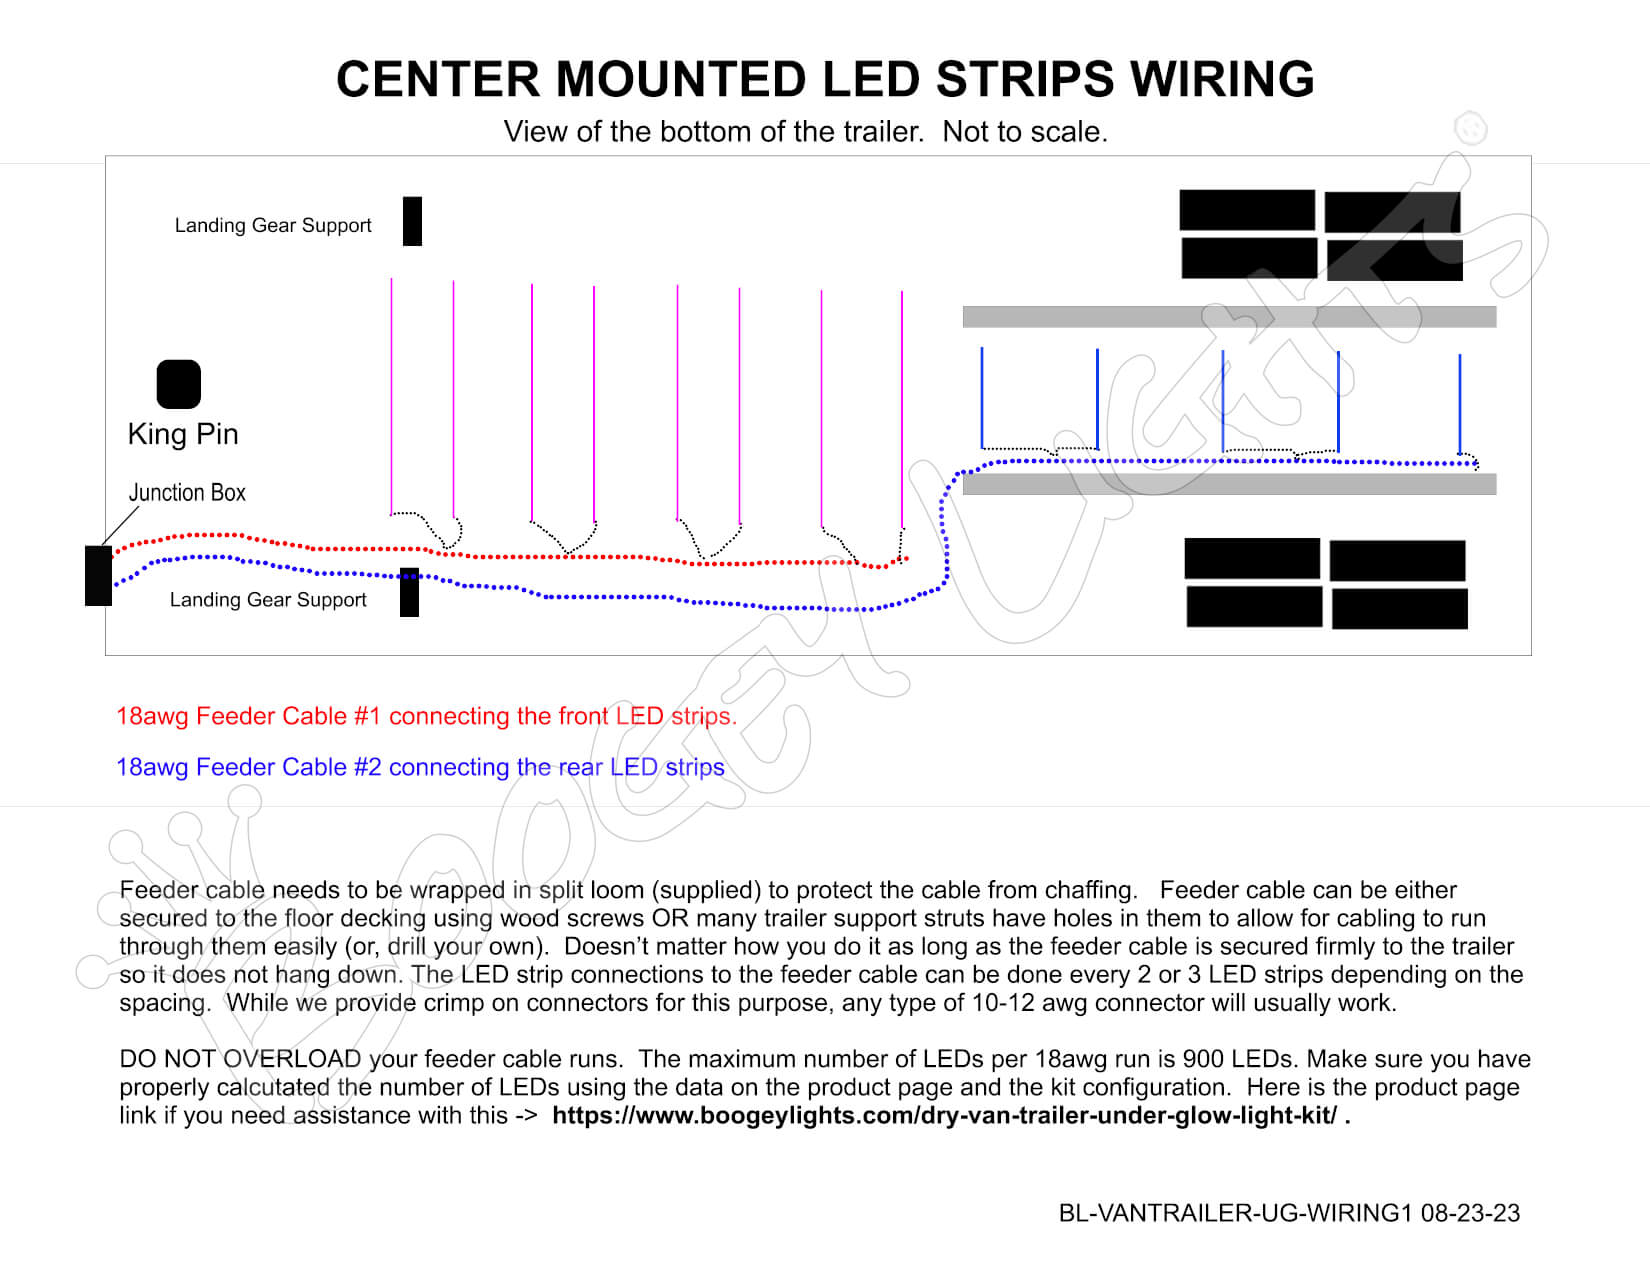 Wiring The Center Mounted LED Strips